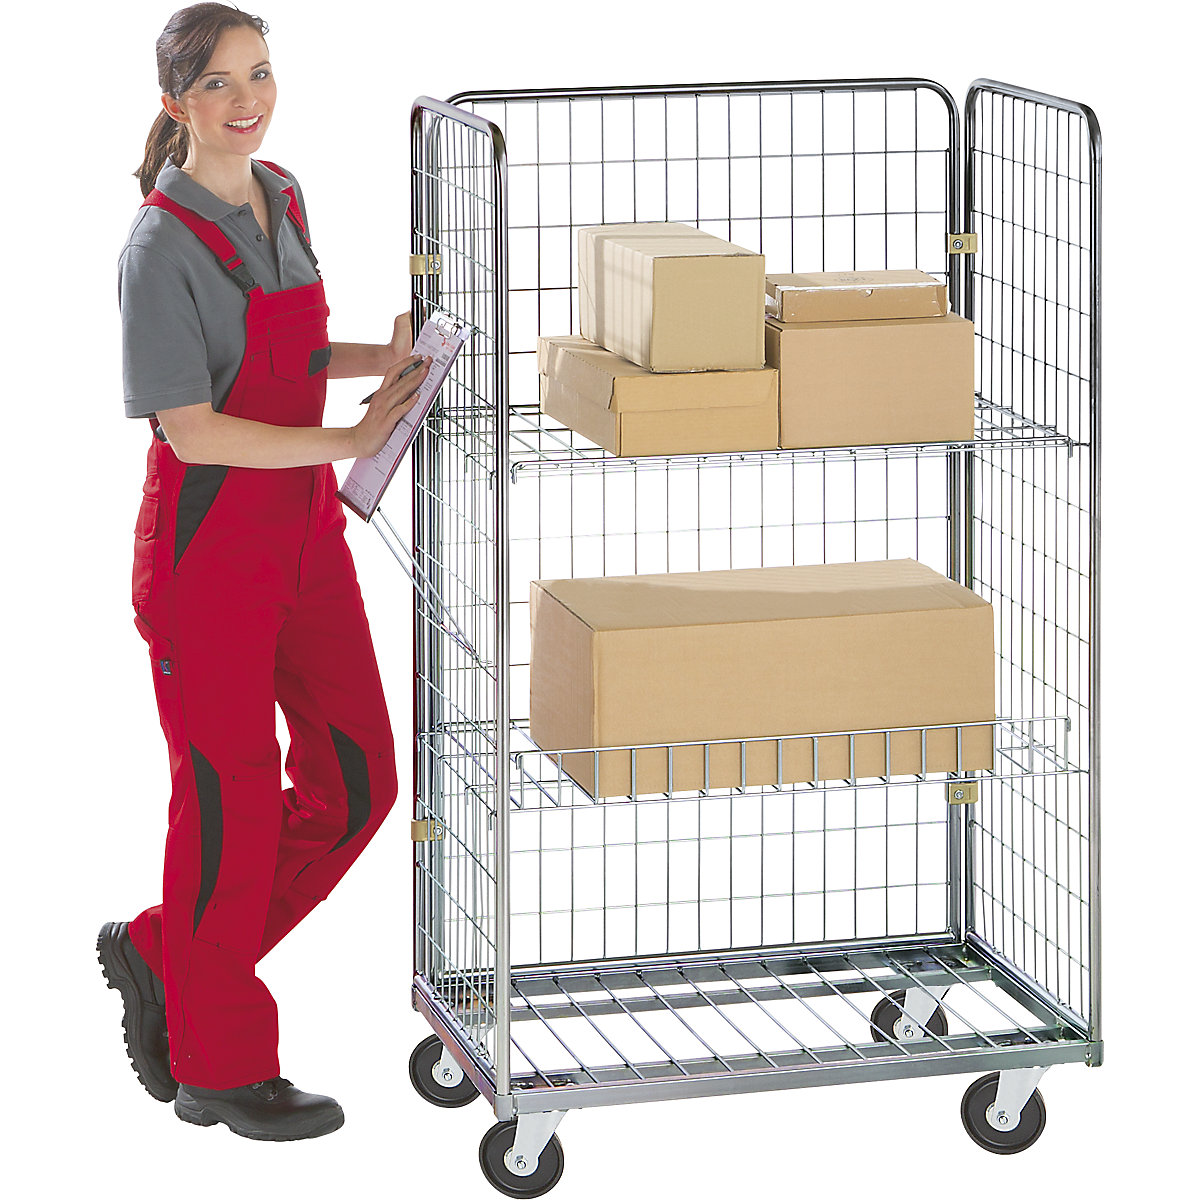 Roll containers, order picking trolley, WxD 900 x 600 mm, height 1585 mm, wheel Ø 100 mm, 10+ items-7